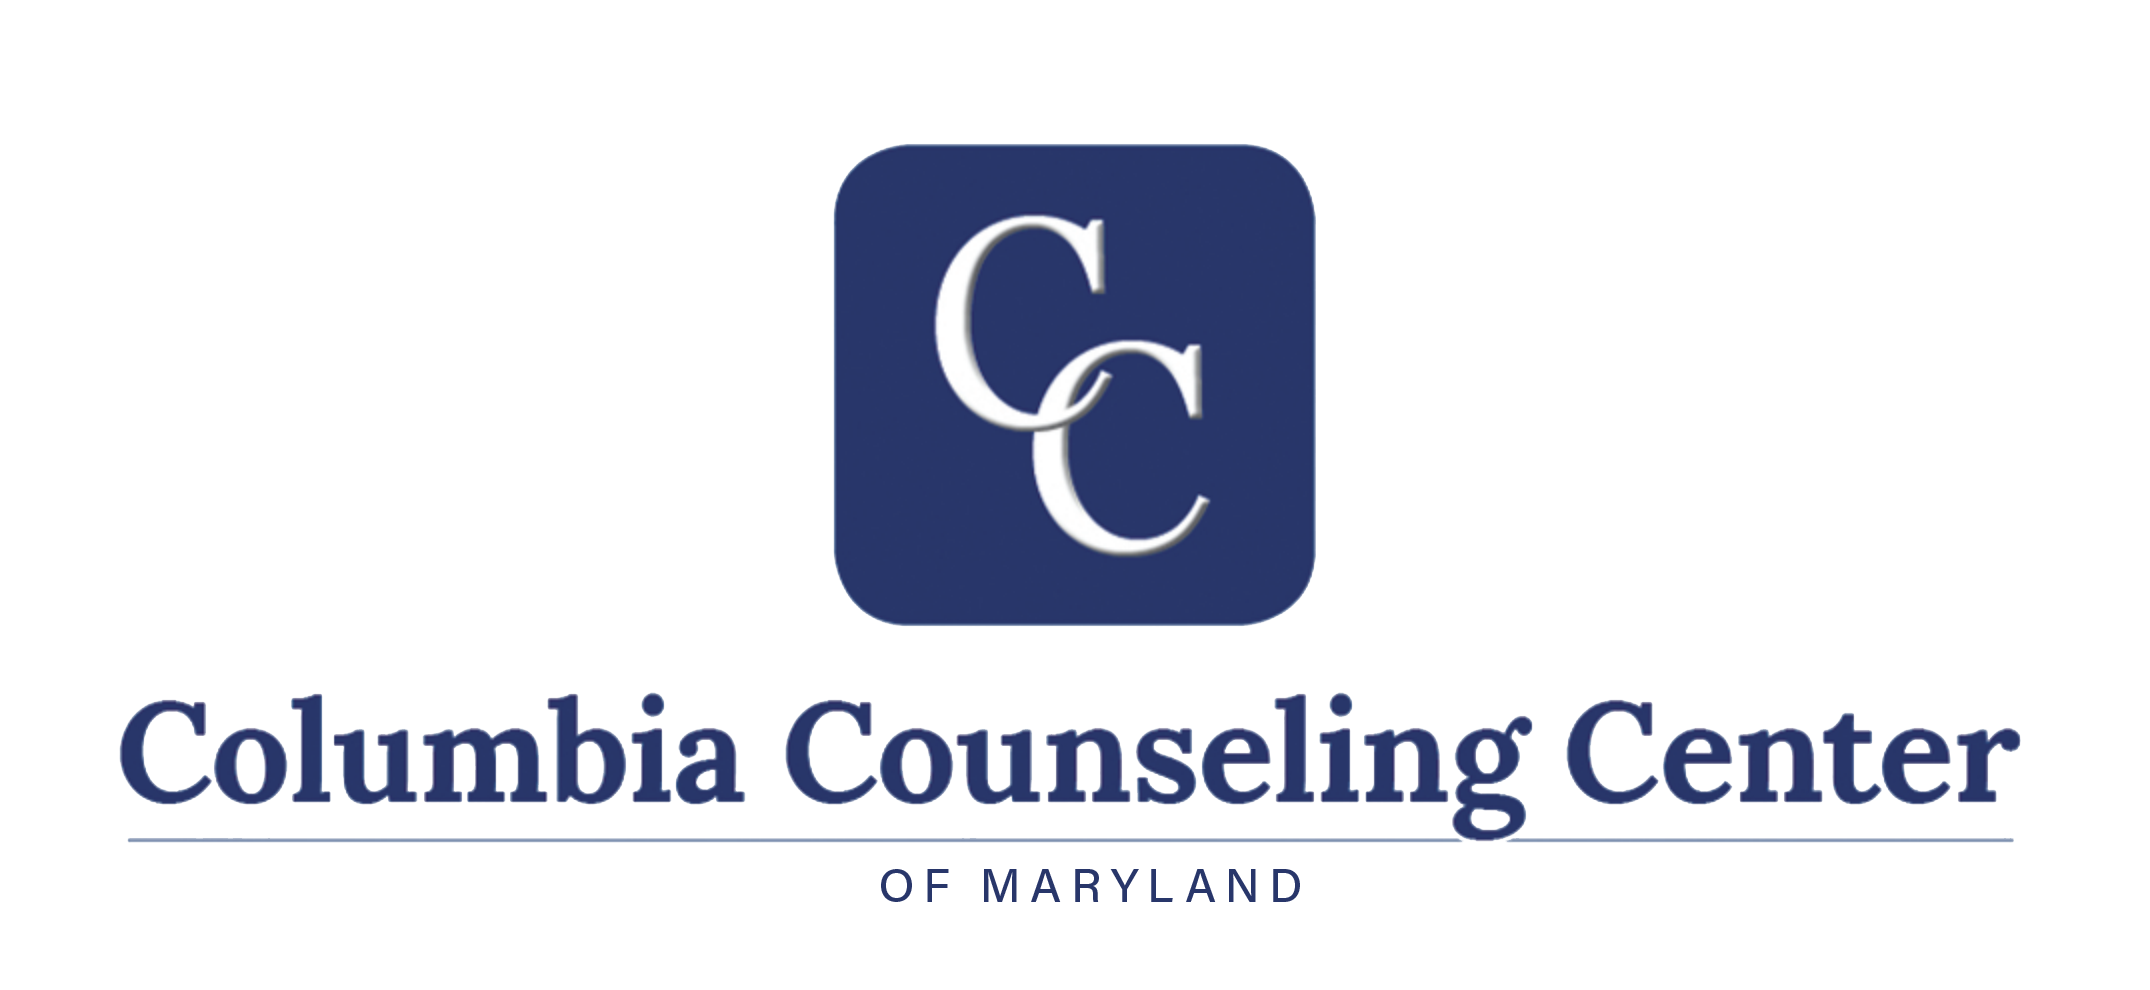 Columbia Counseling Center of Maryland